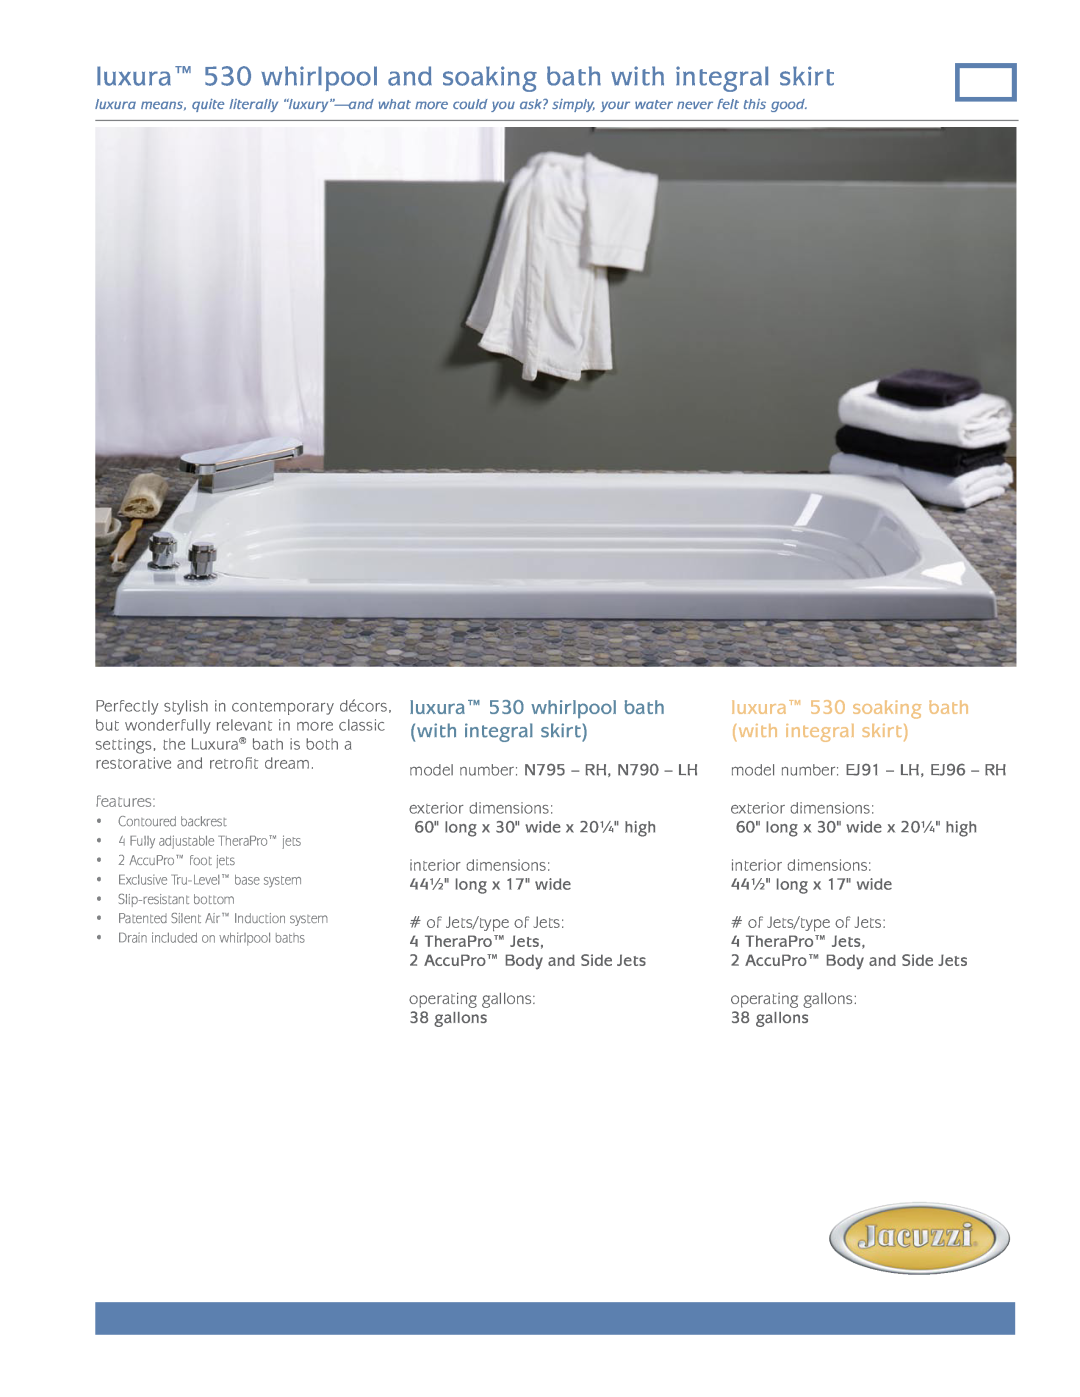 Jacuzzi dimensions luxura 530 whirlpool and soaking bath with integral skirt, luxura 530 whirlpool bath, features 